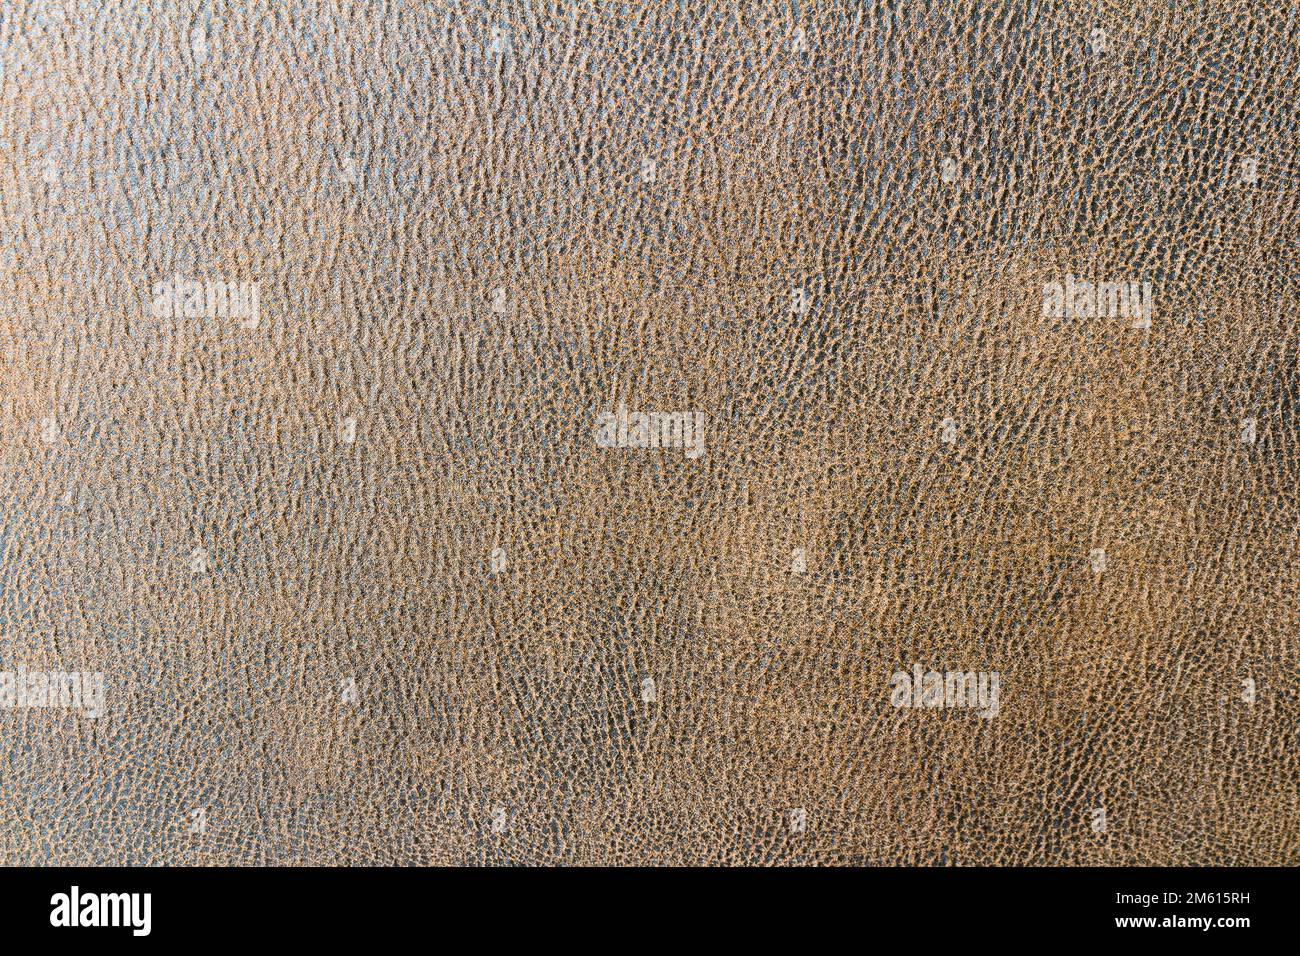 brown leather sofa background. Stock Photo